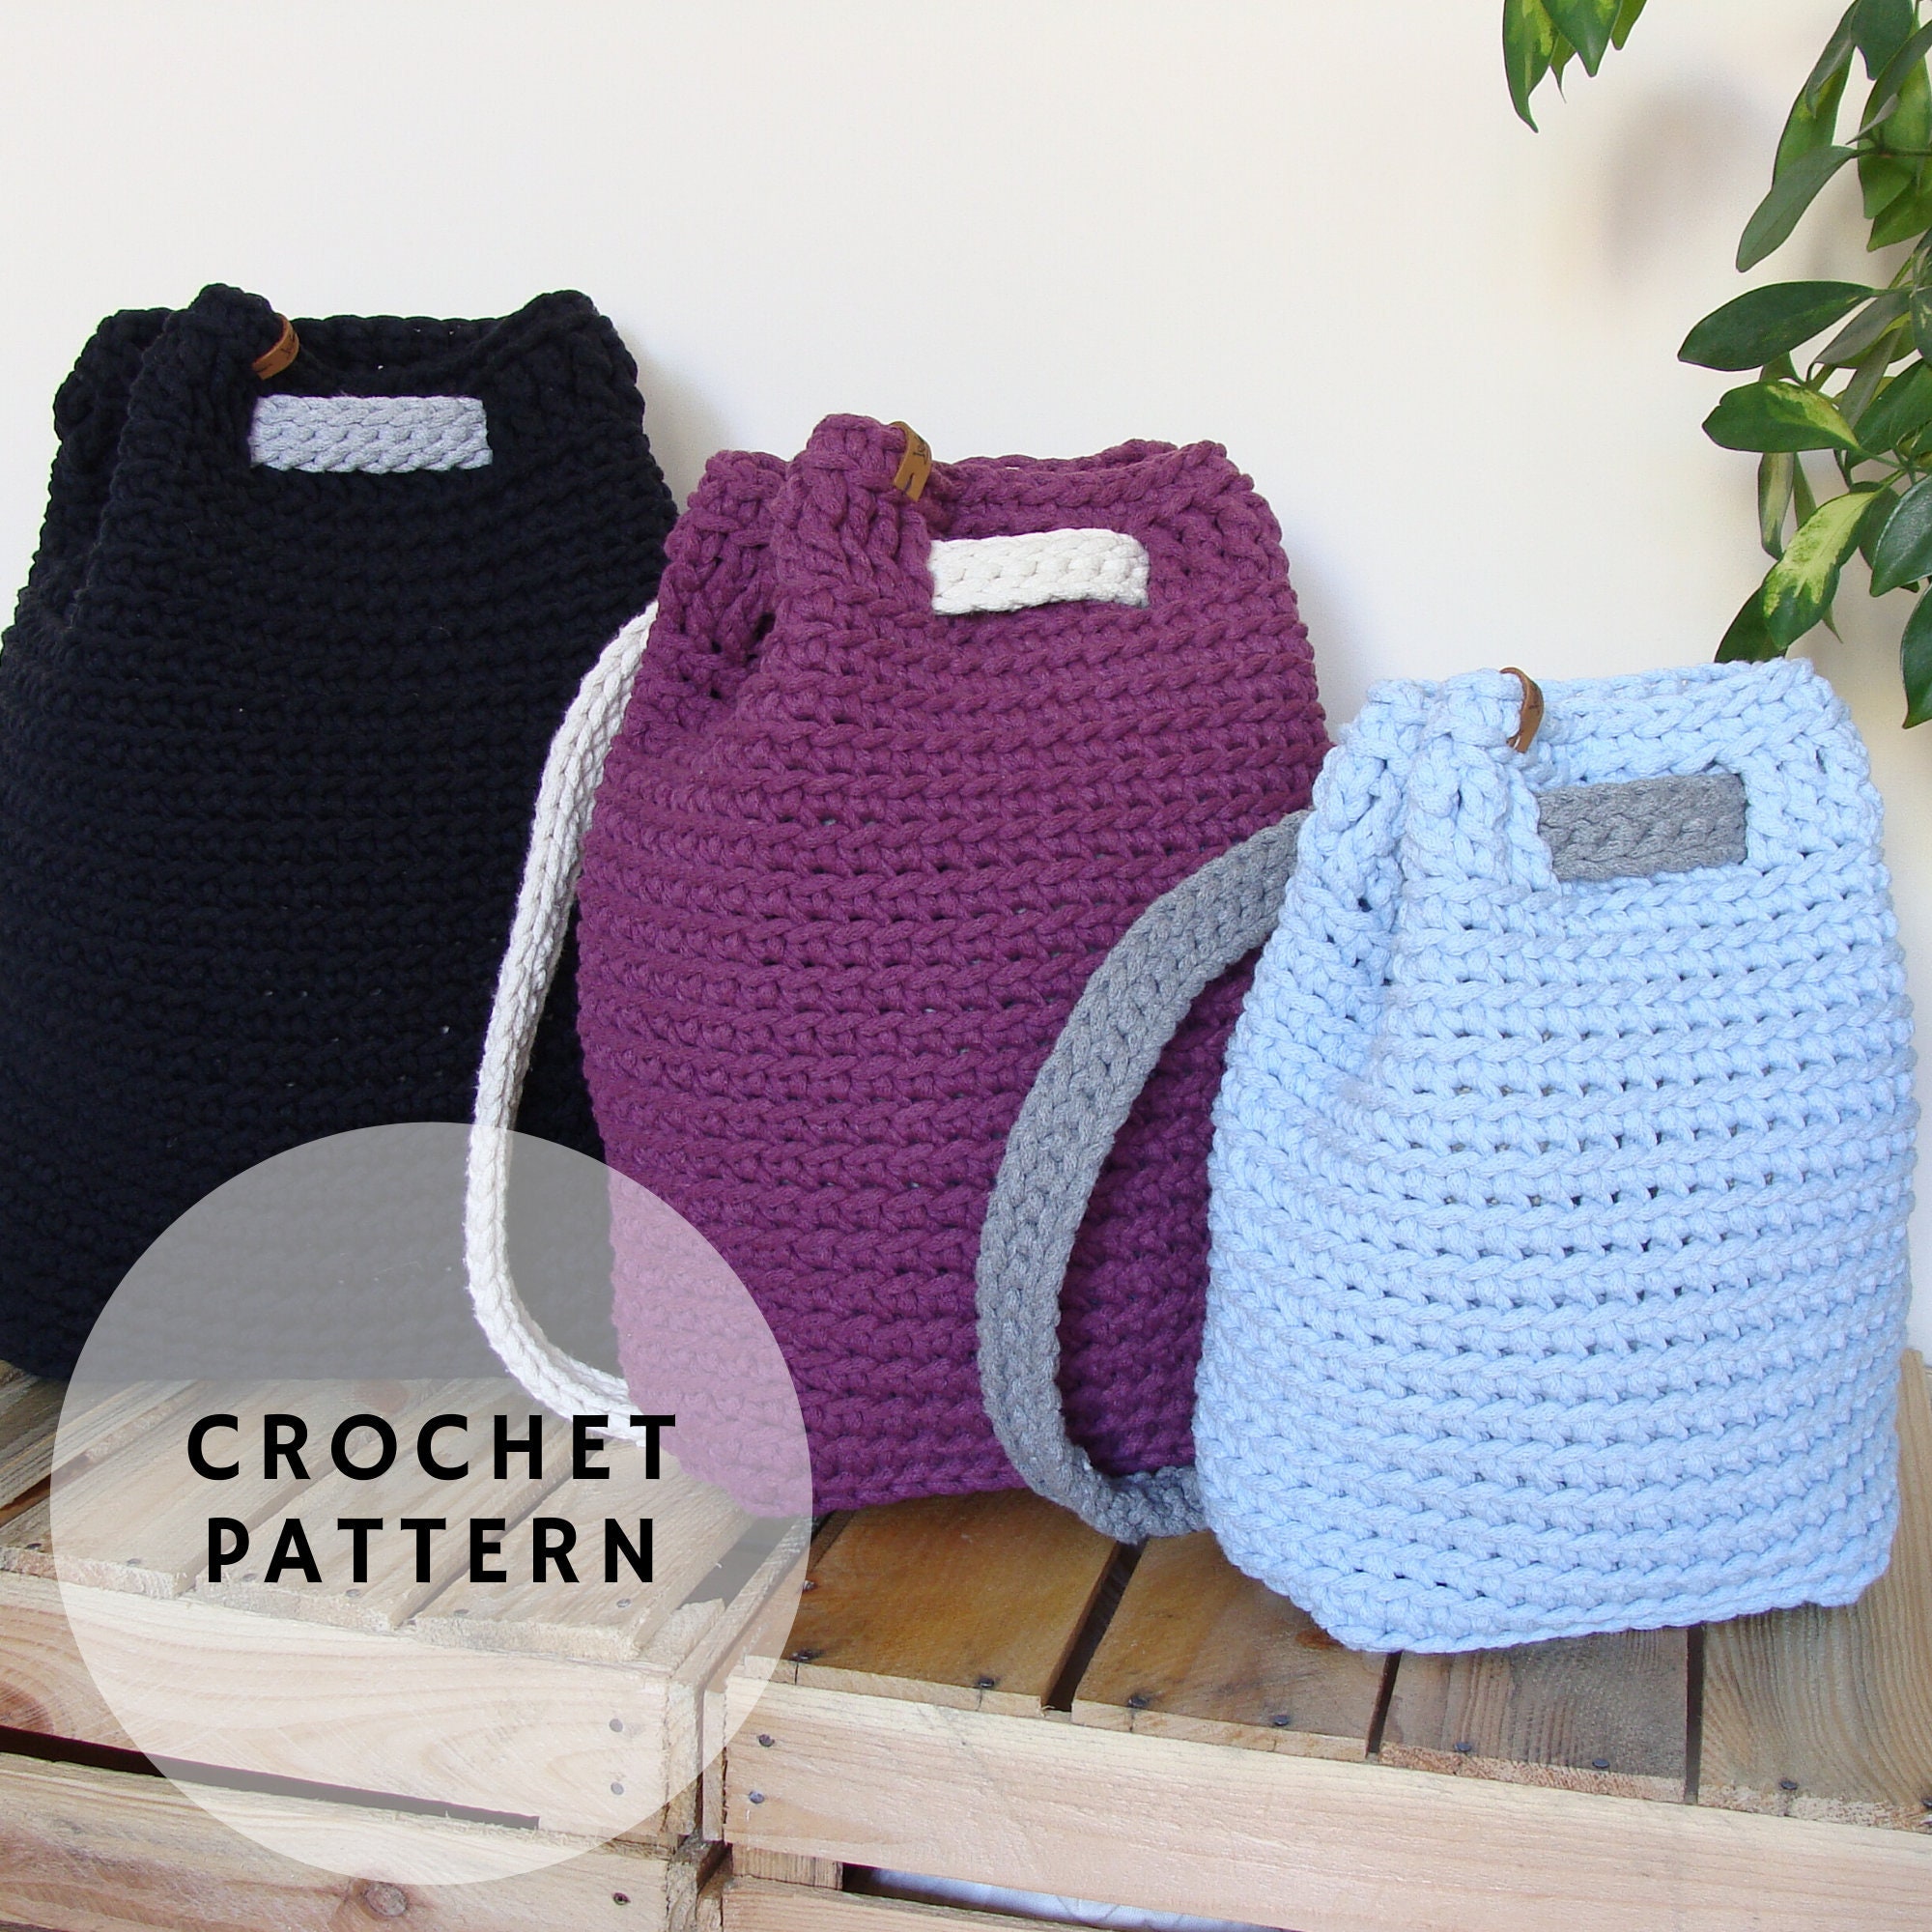 Crochet backpack for travelling, going to a concert, carrying your